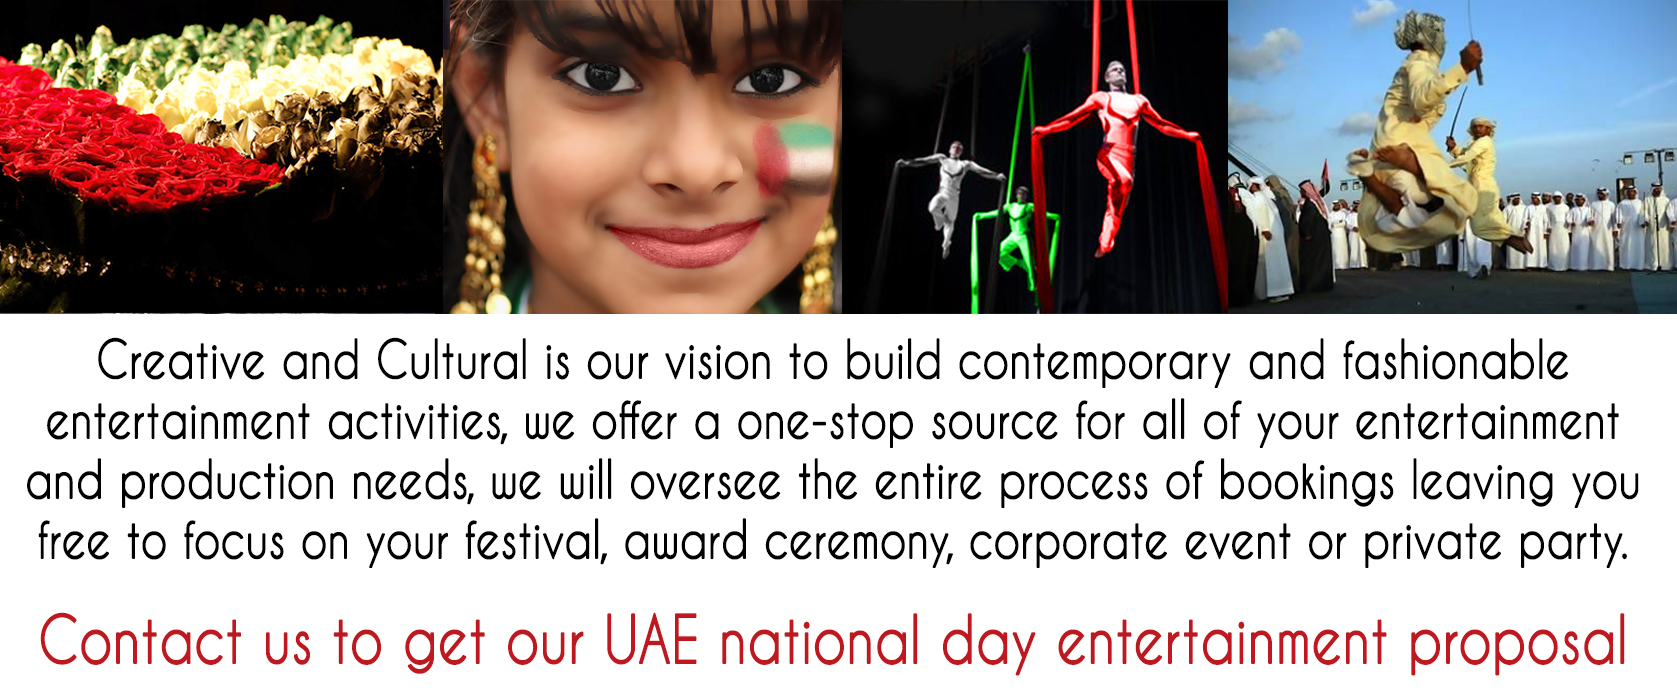 44TH UAE National Day Entertainment